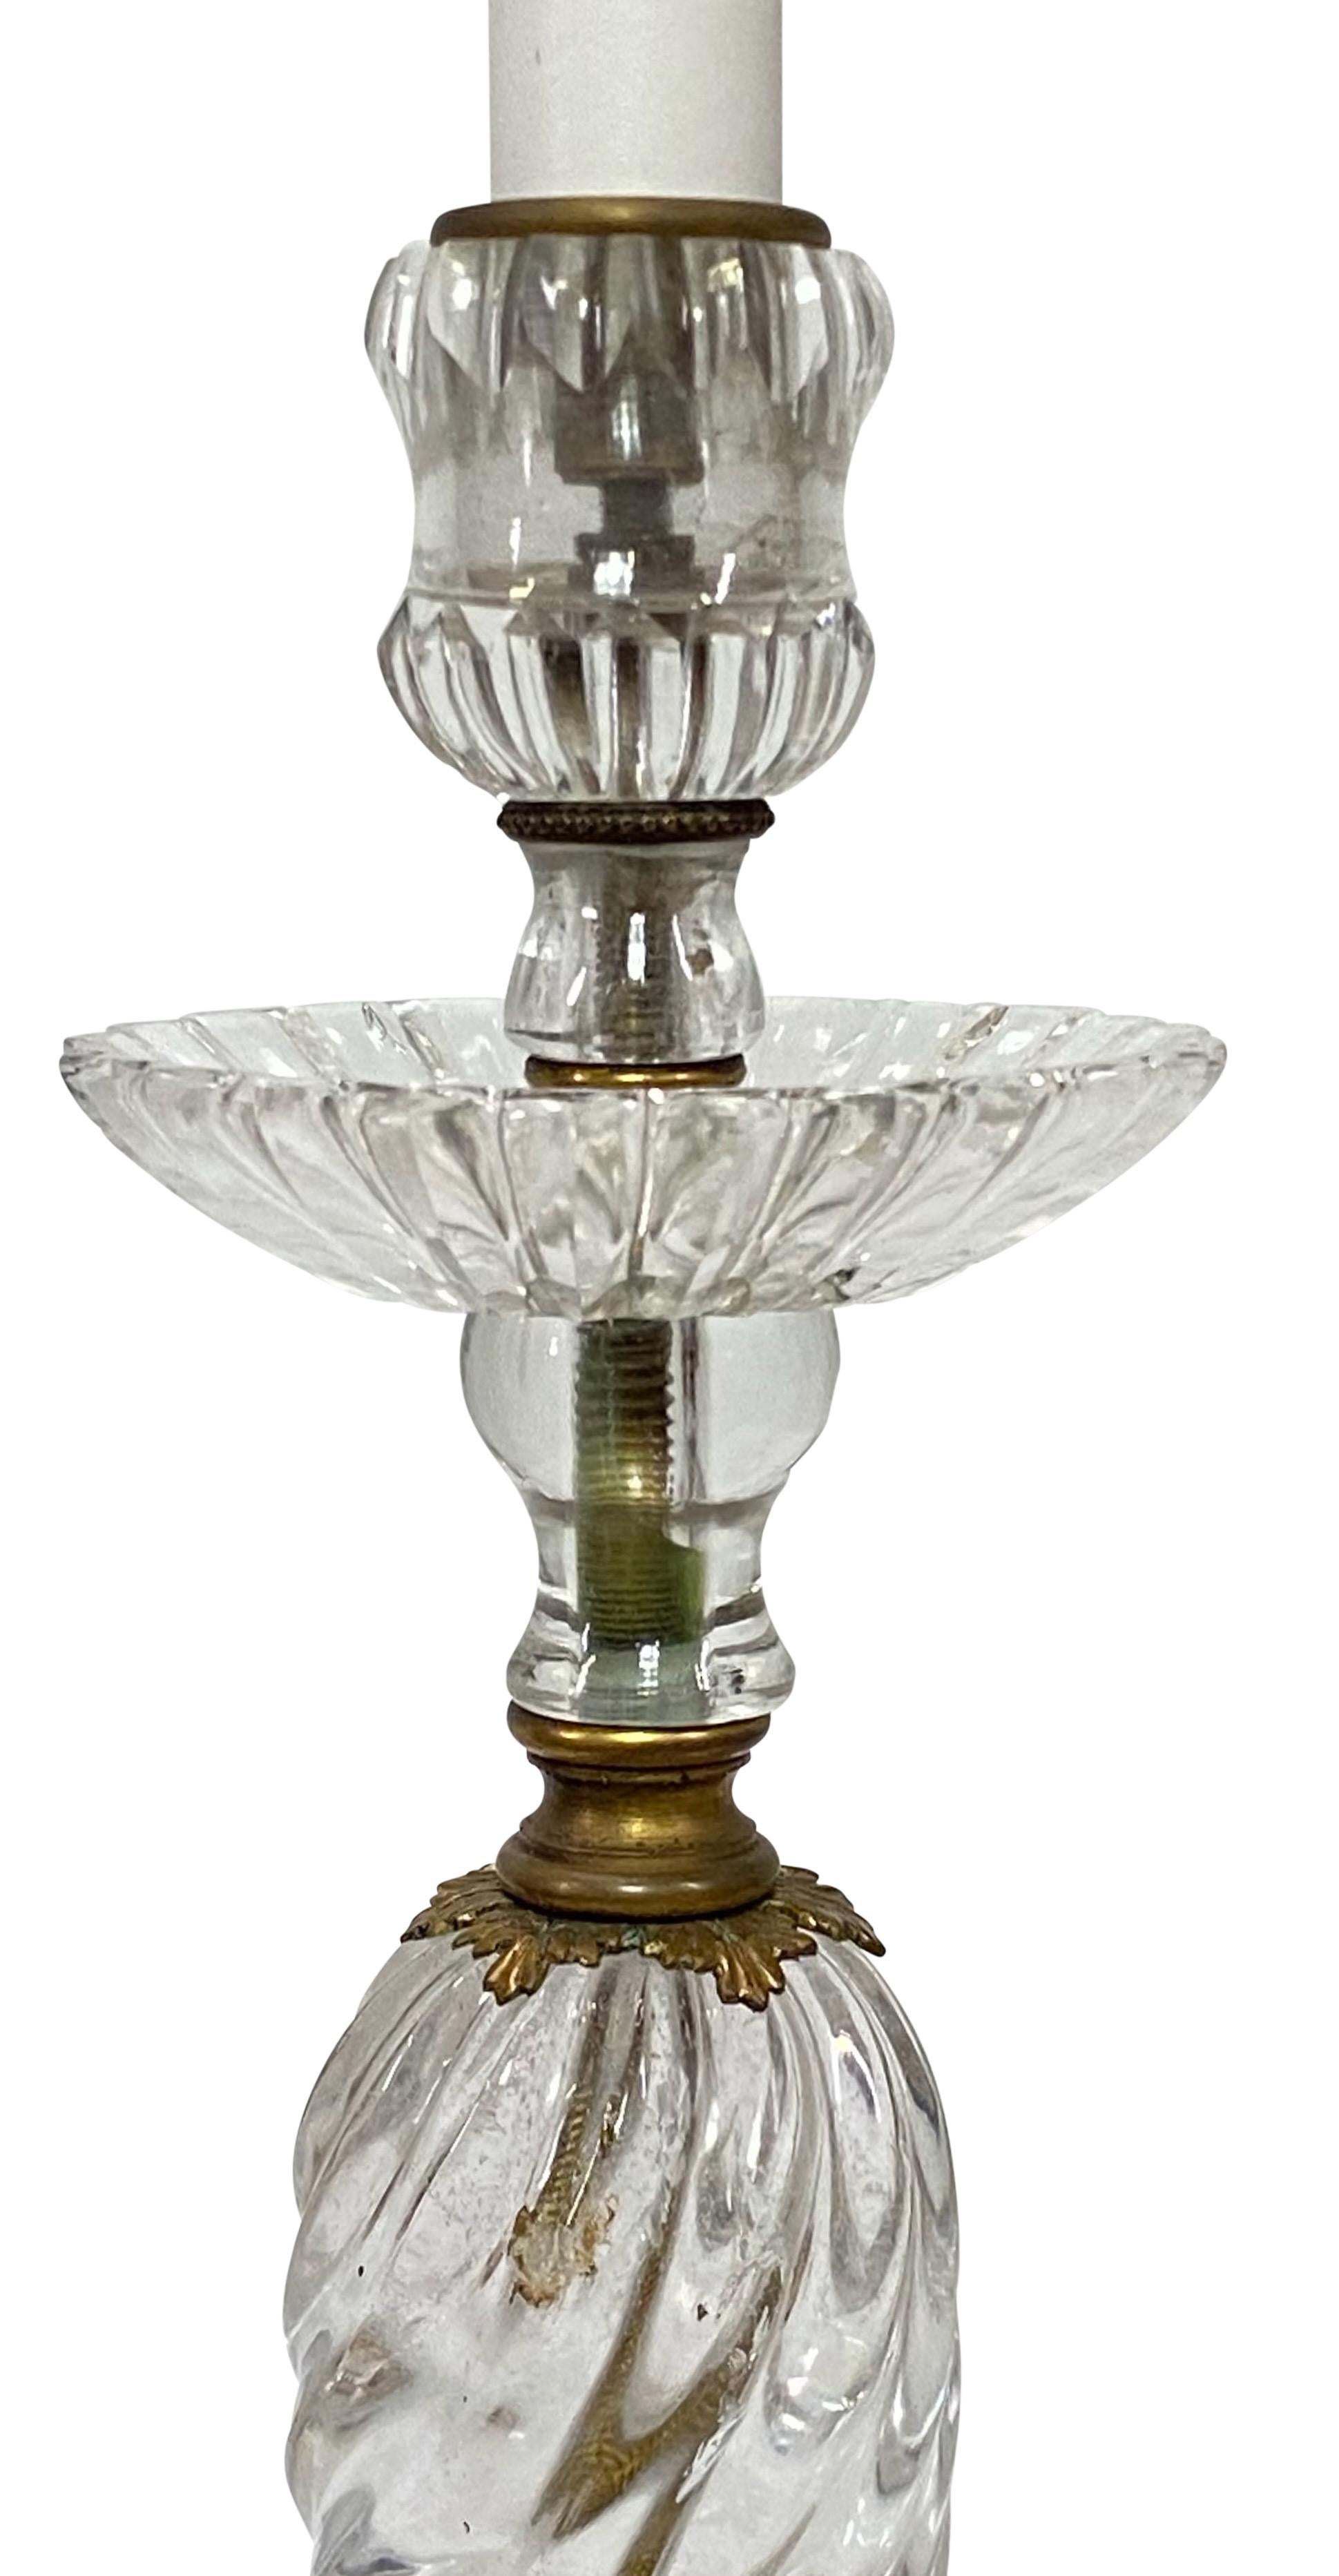 Pair of Early 19th Century French Rock Crystal Candle Stick Boudoir Lamps For Sale 6